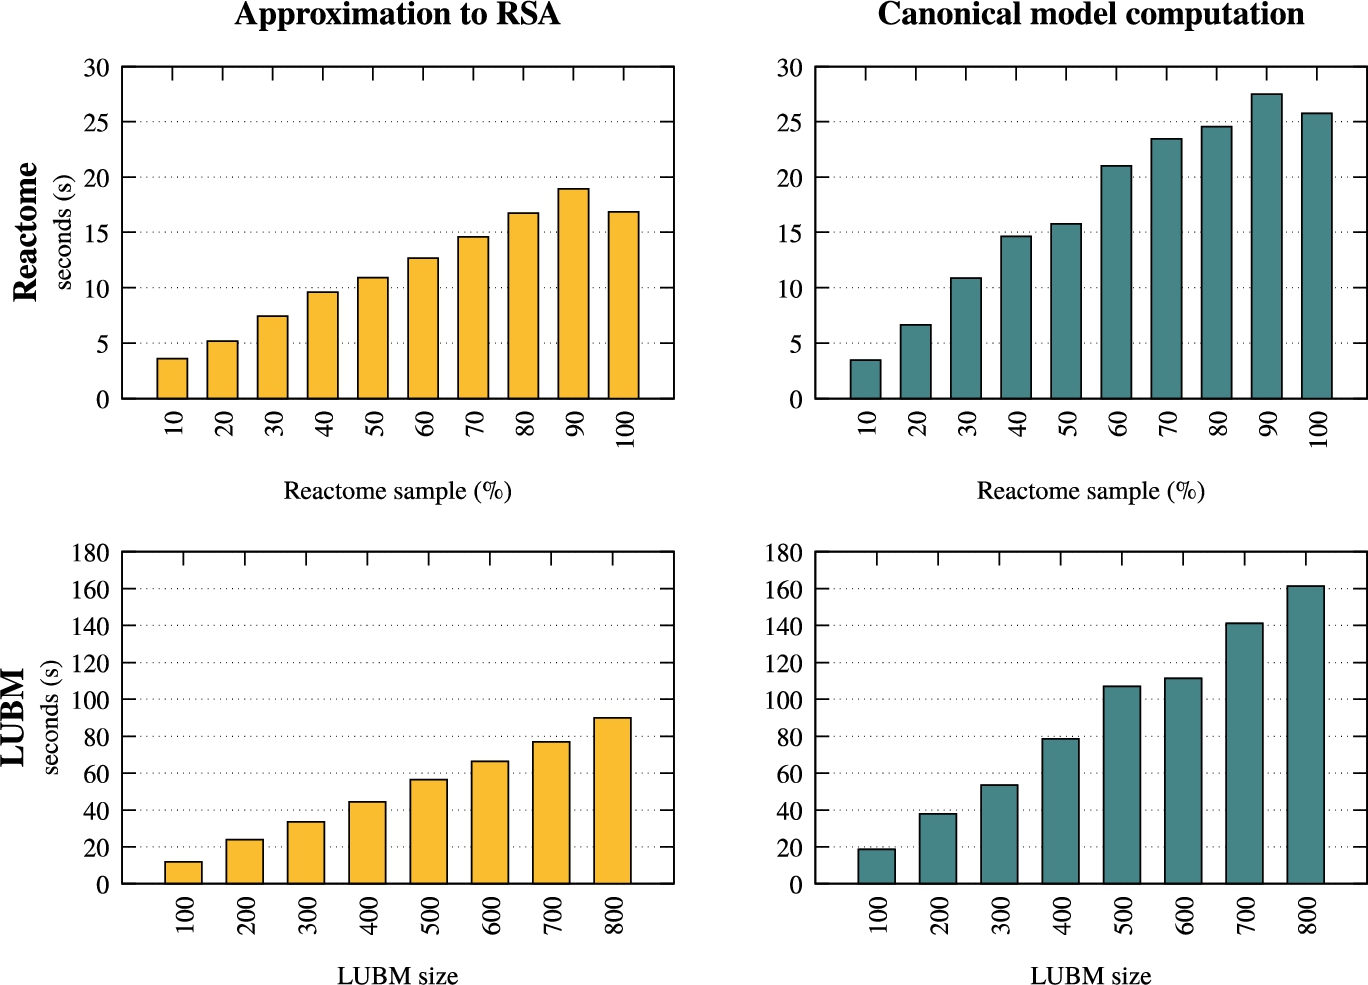 Scalability of approximation to RSA and canonical model computation in RSAComb.